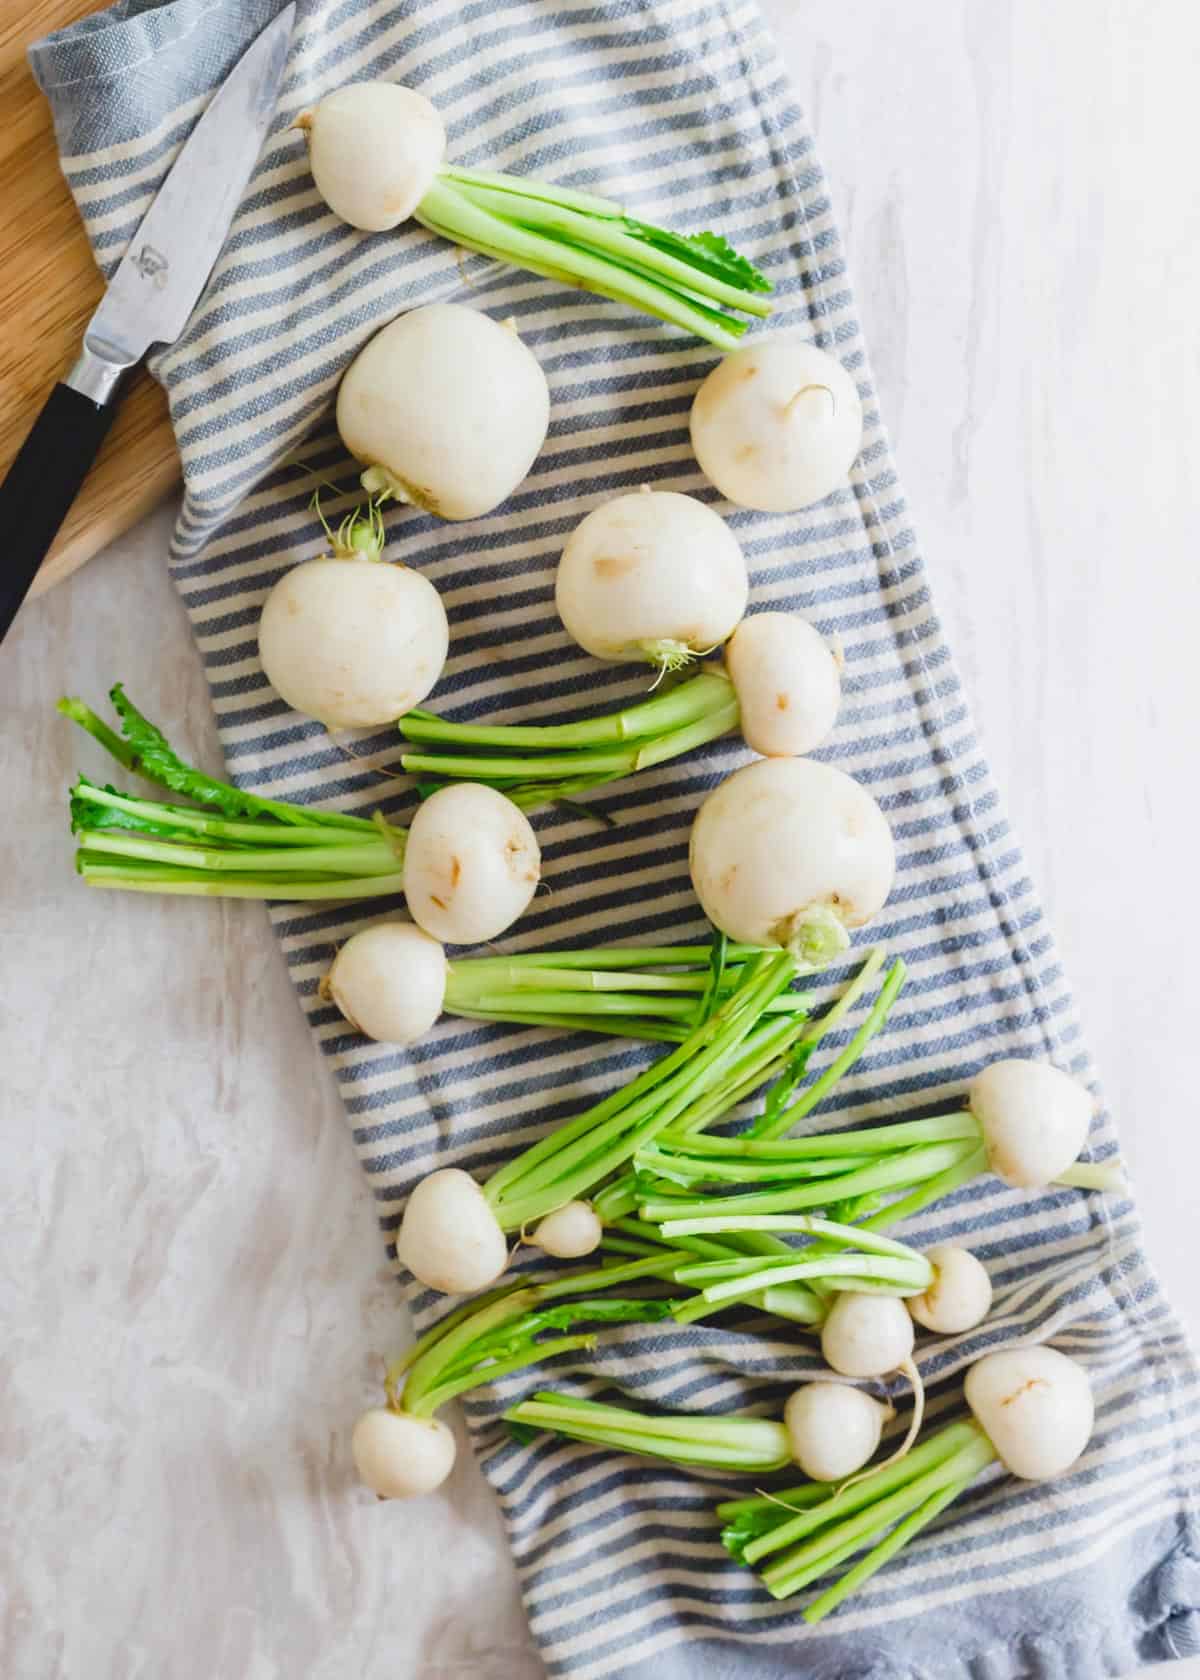 White Harukei turnips with green stems attached on a kitchen towel.